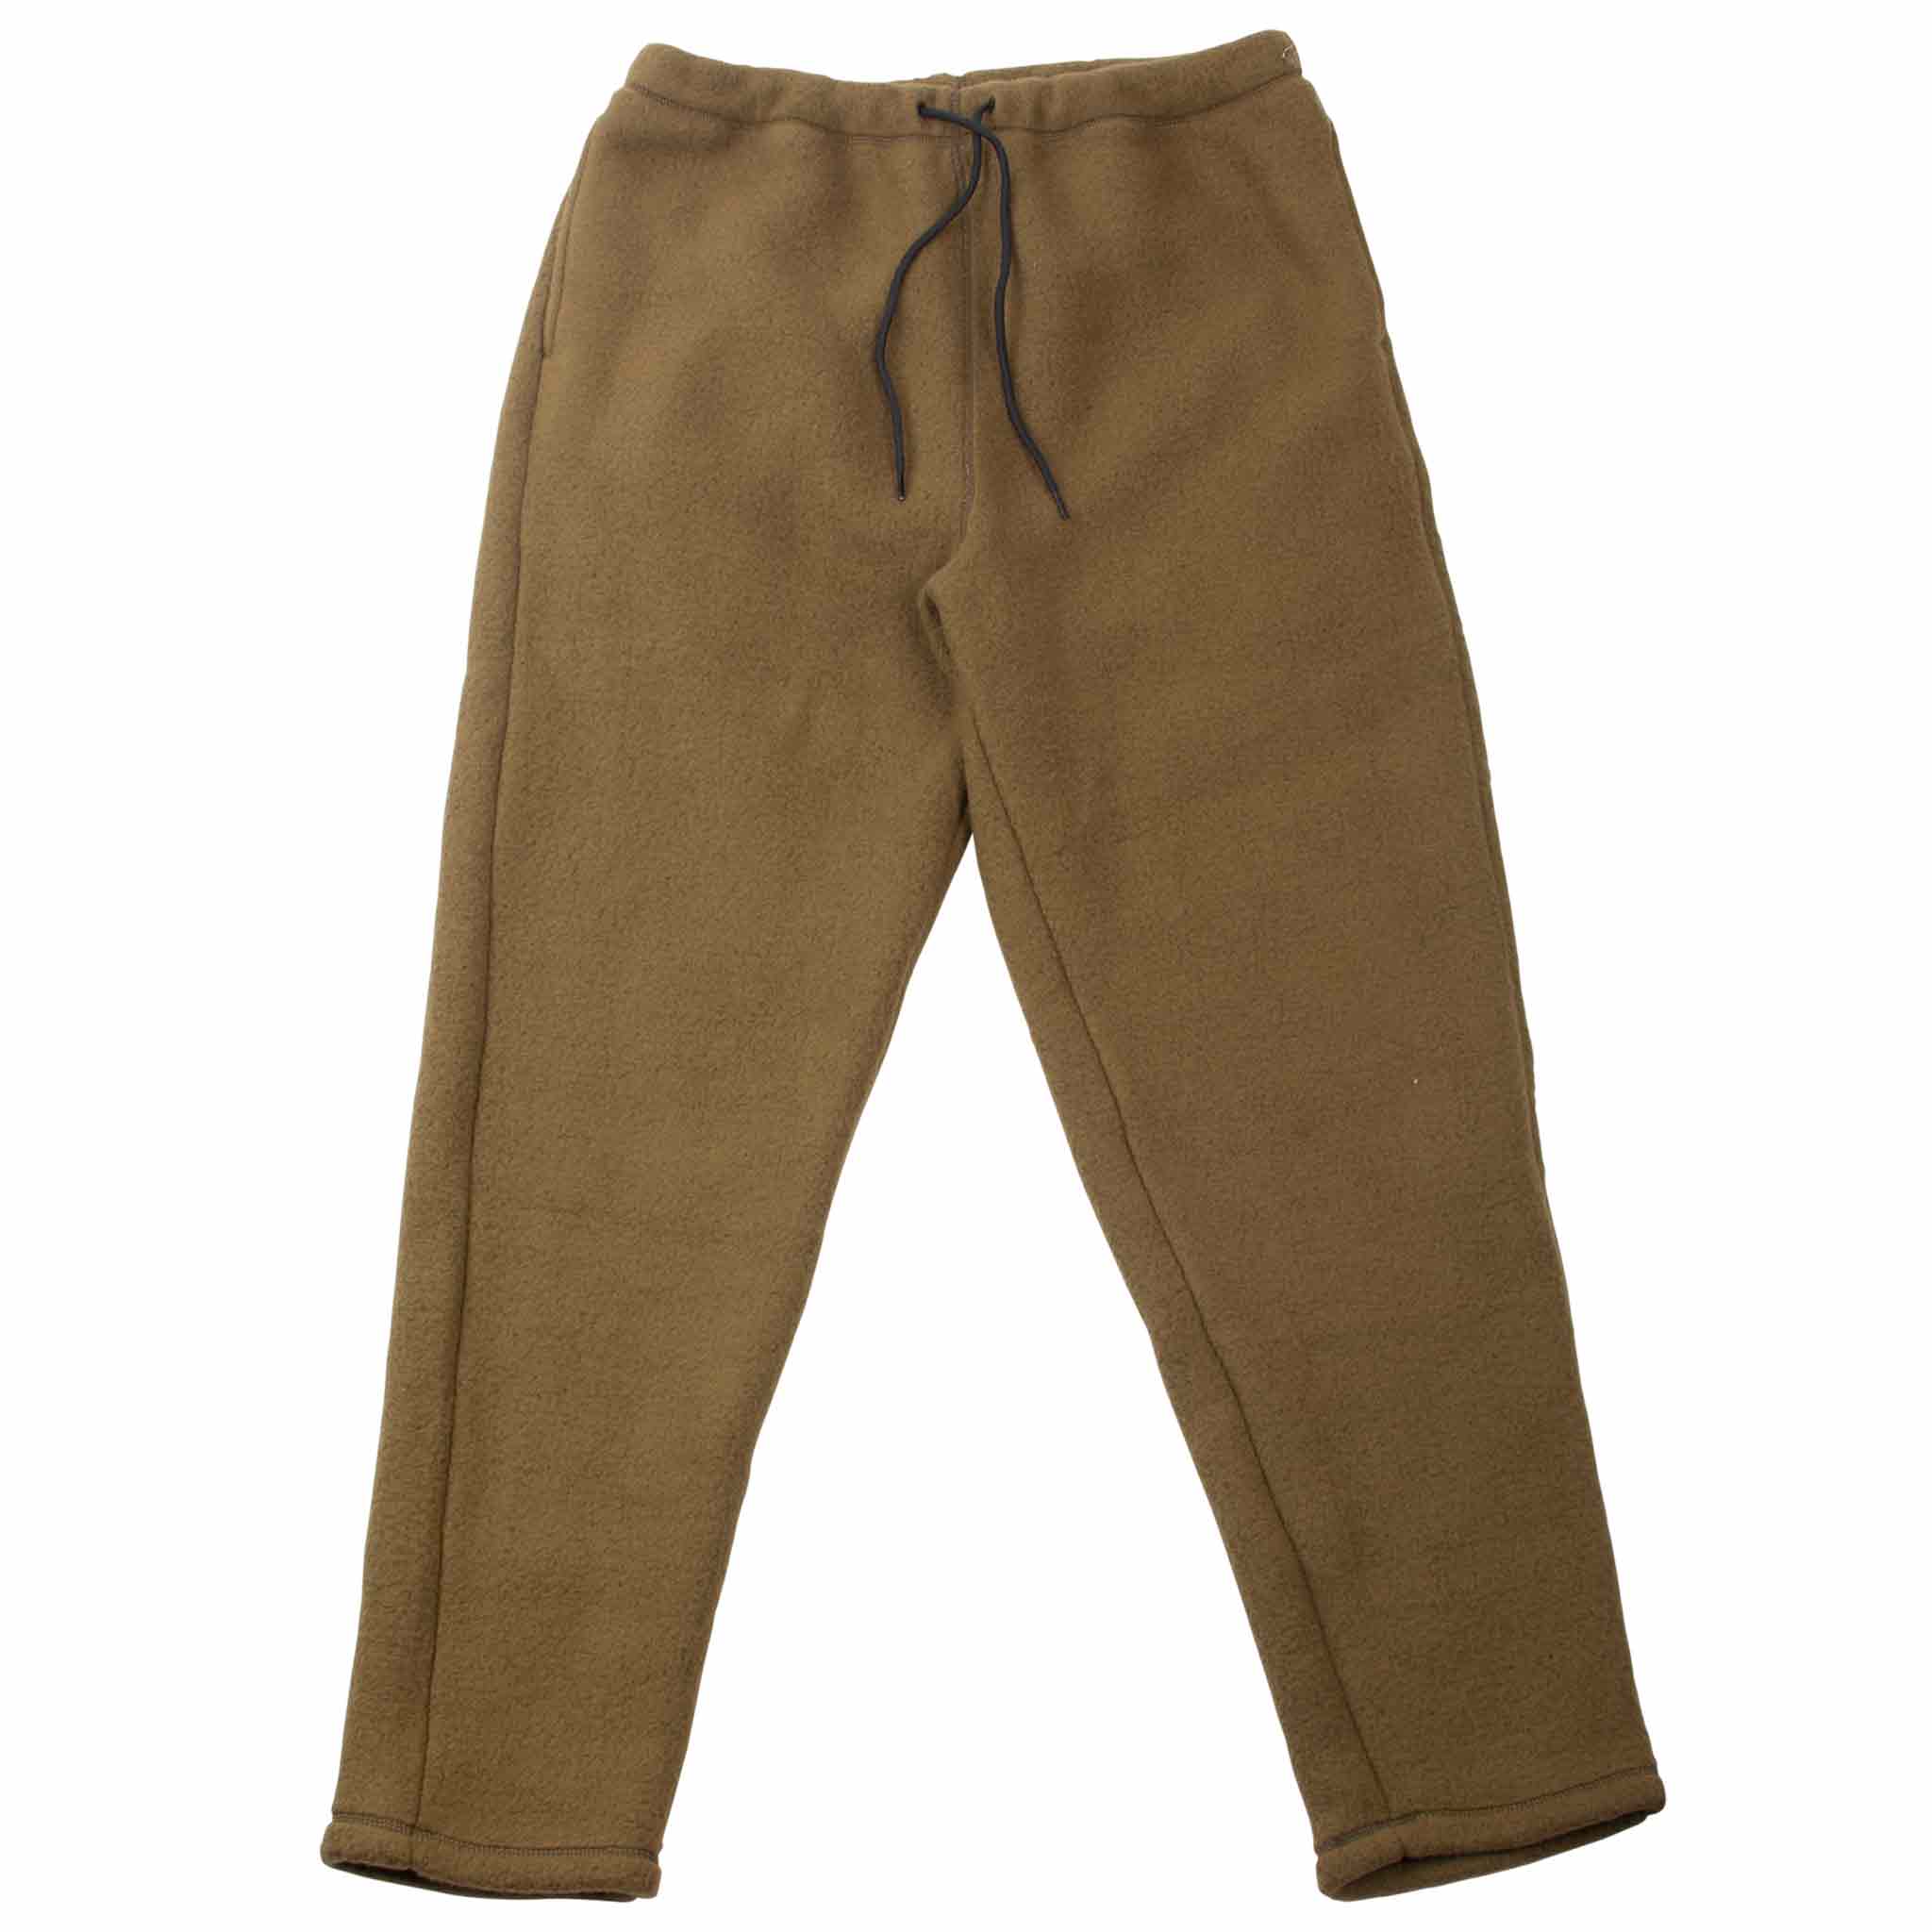 The Real McCoy's MC21102 Trousers, Cold Weather, Fleece Coyote